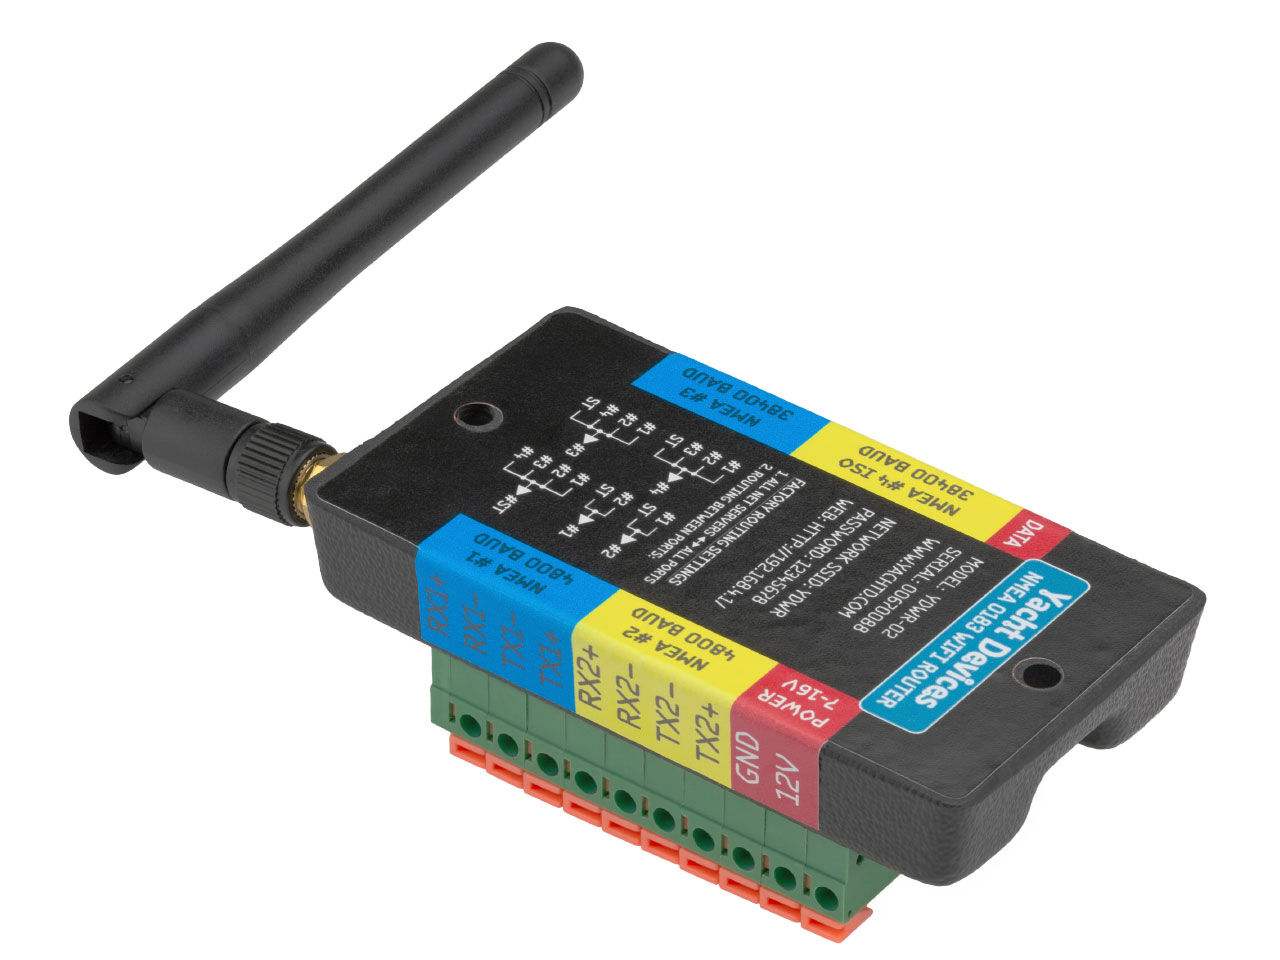 Yacht Devices NMEA0183 Wi-Fi Router YDWR-02